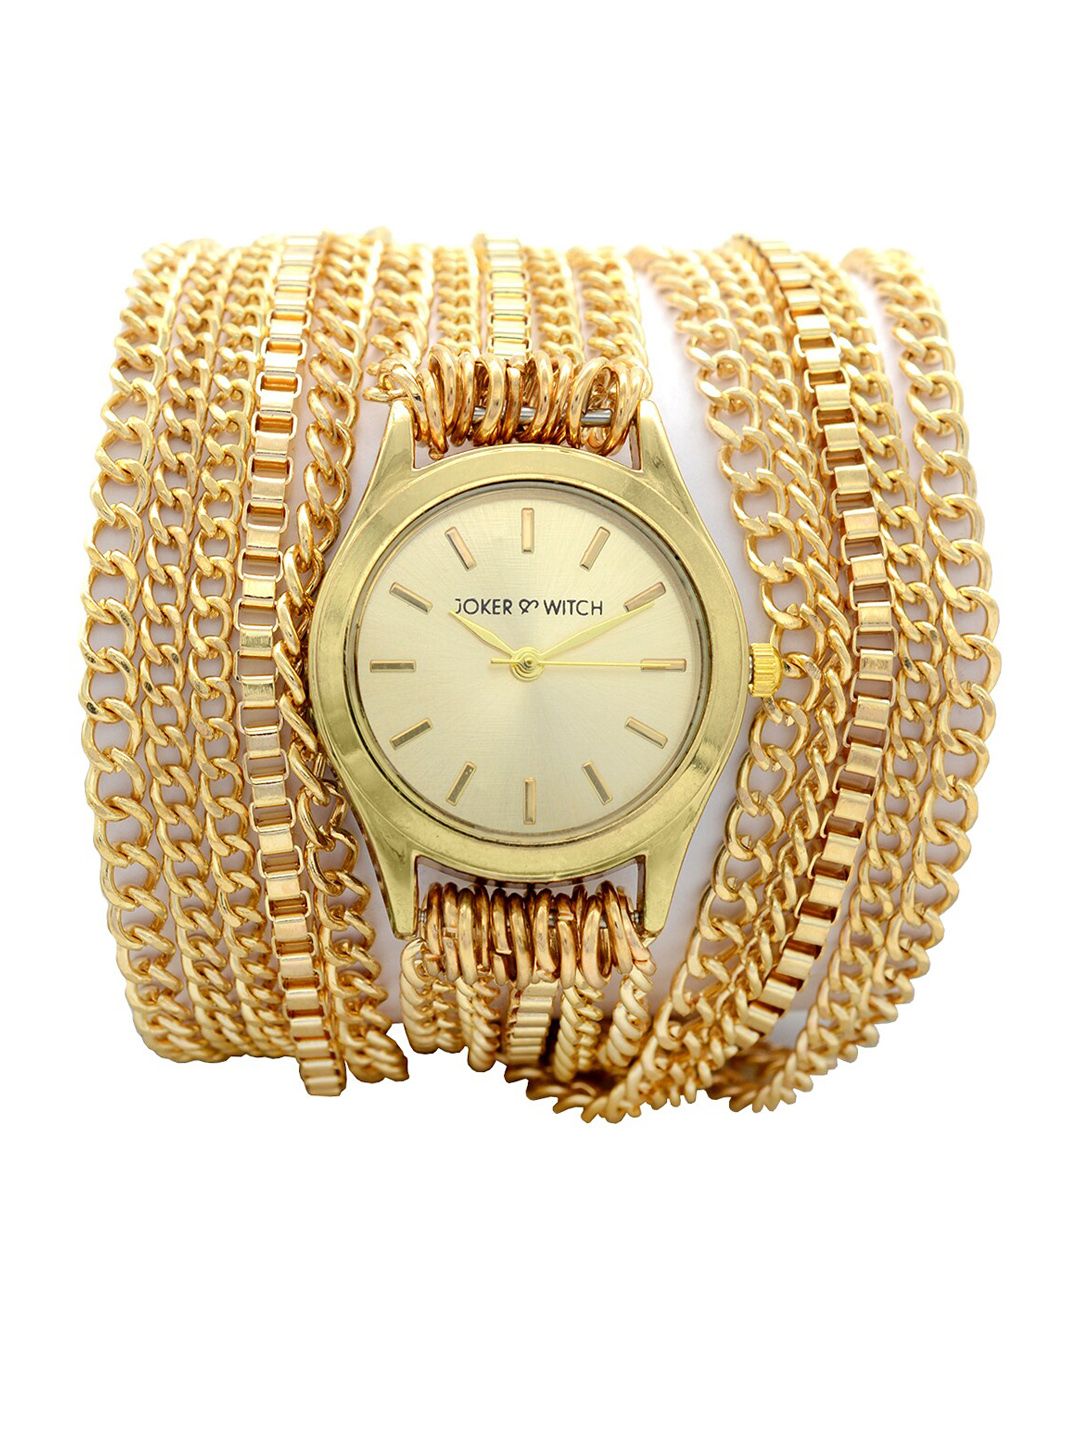 JOKER & WITCH Women Gold-Toned Analogue Watch AMWW88 Price in India